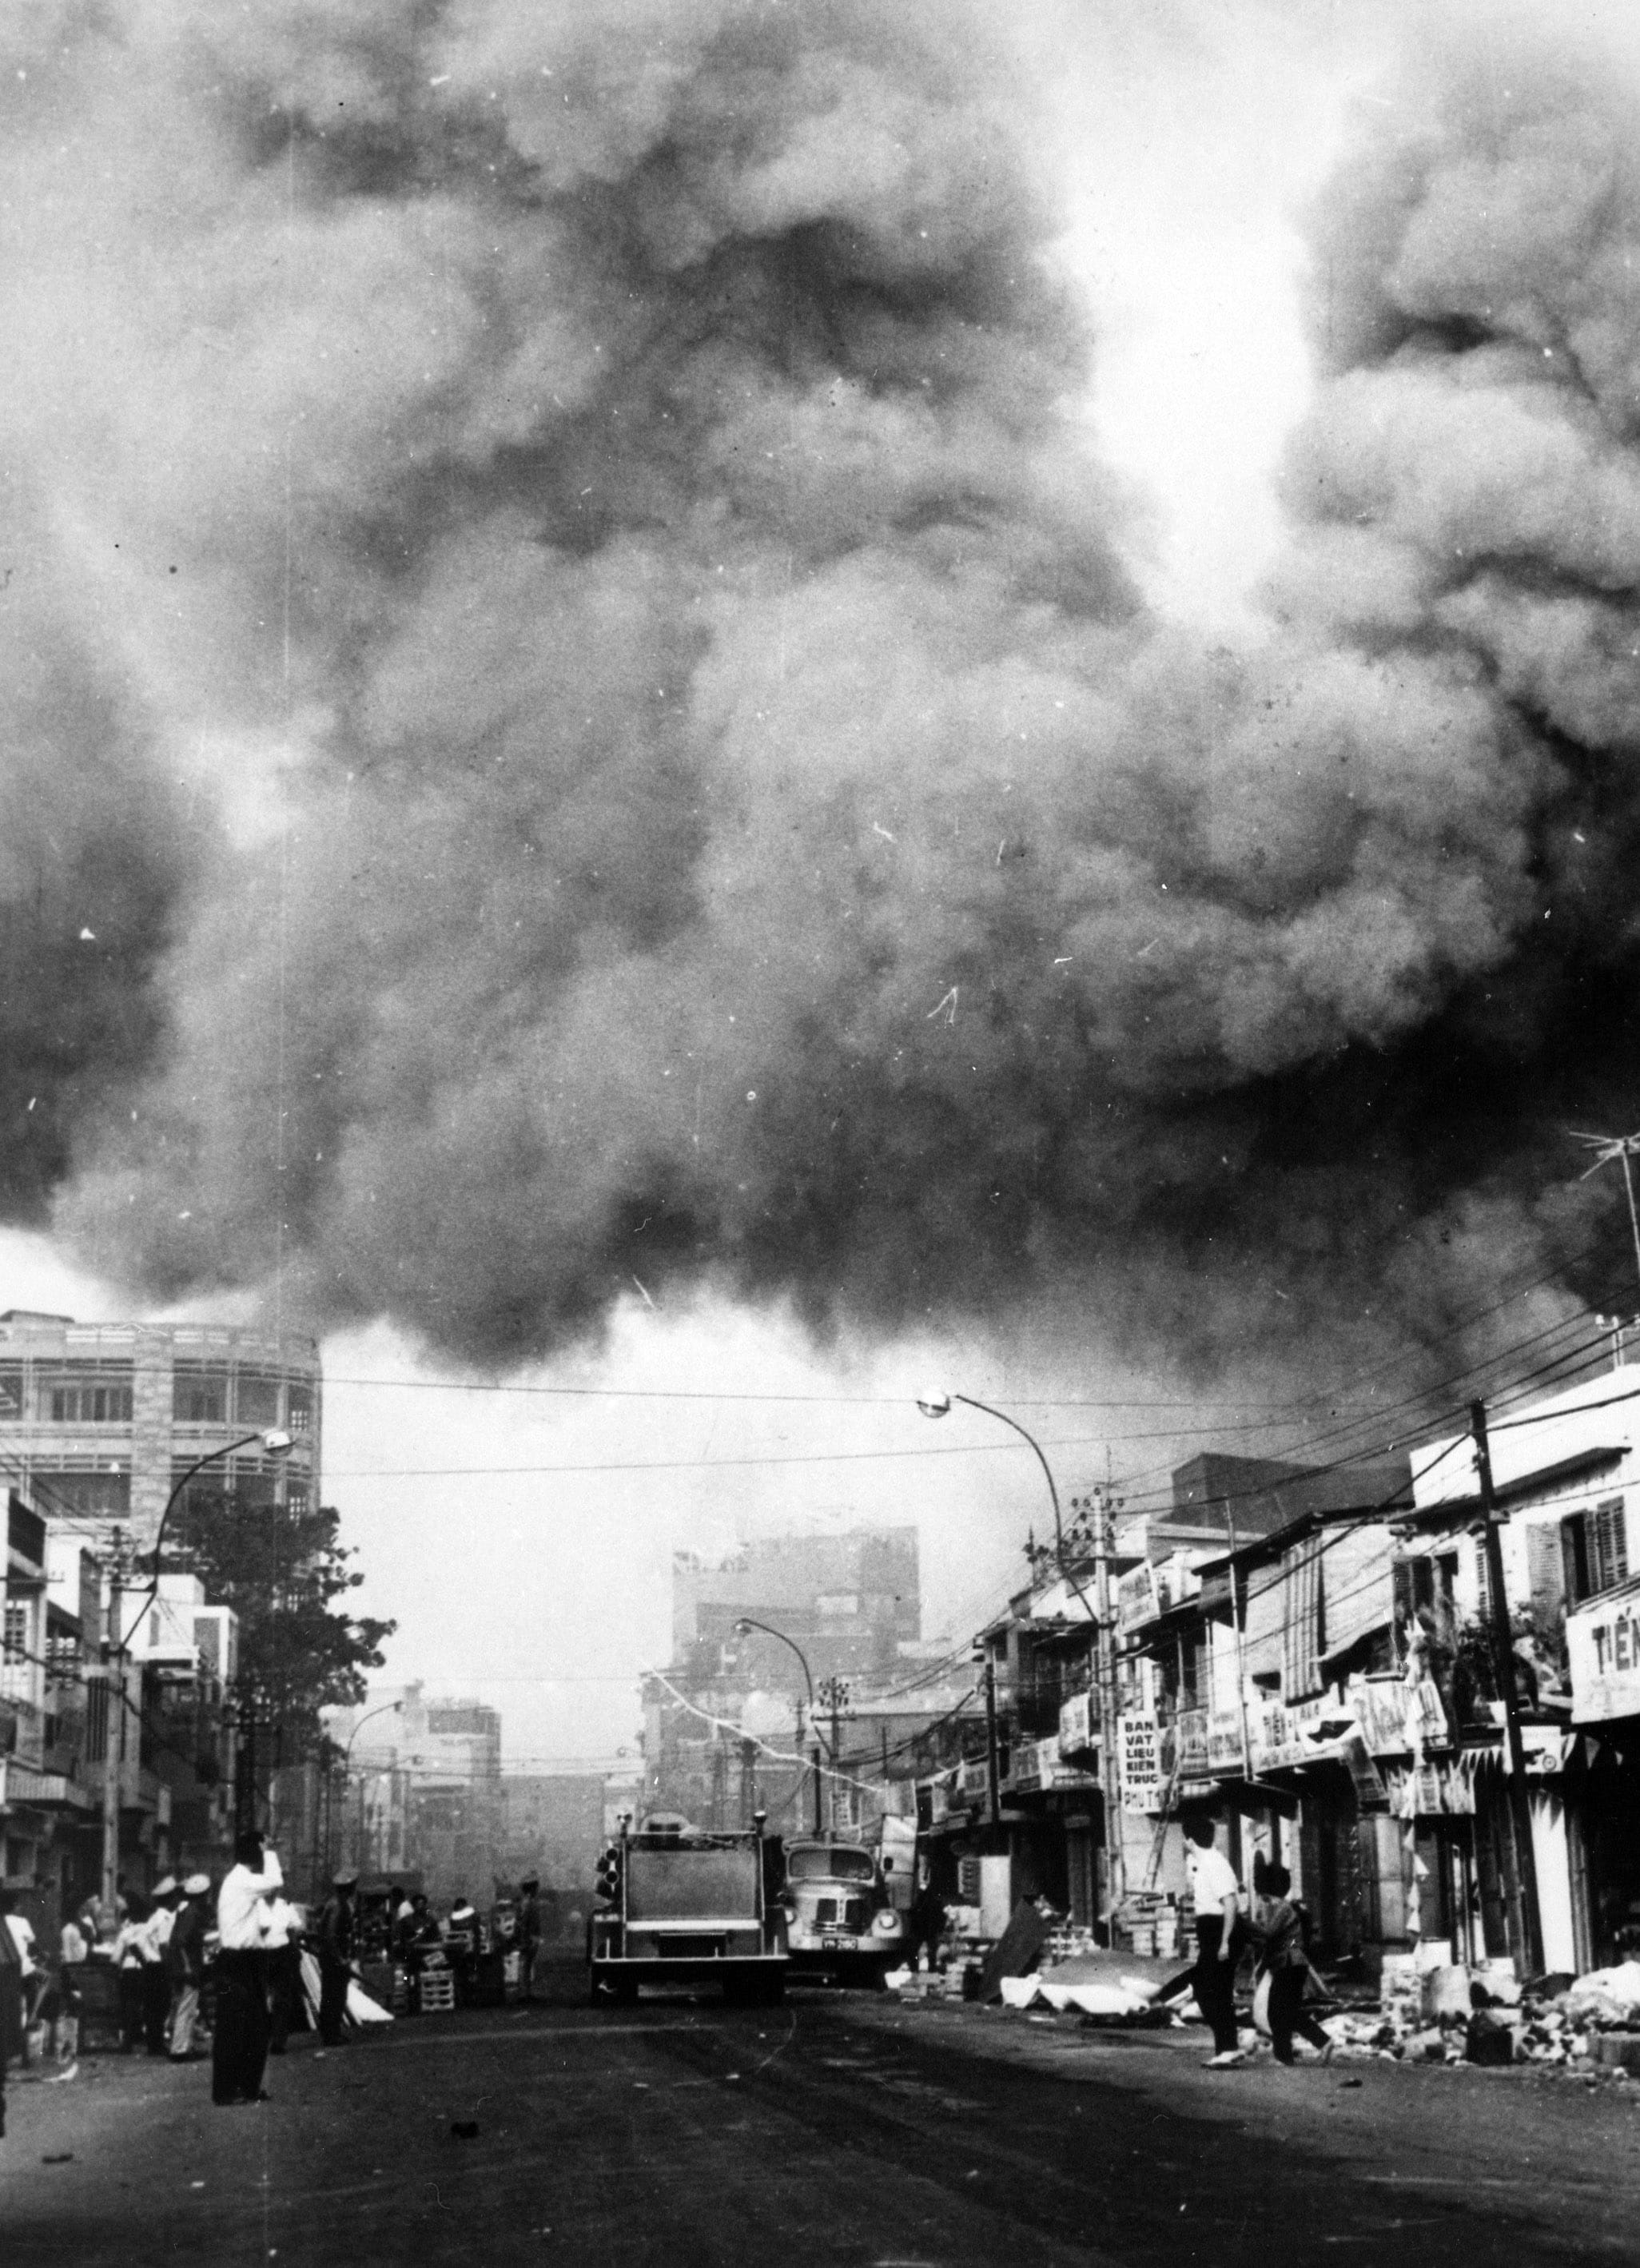 Black smoke covers areas of Sài Gòn during Tet Offensive in the Vietnam War